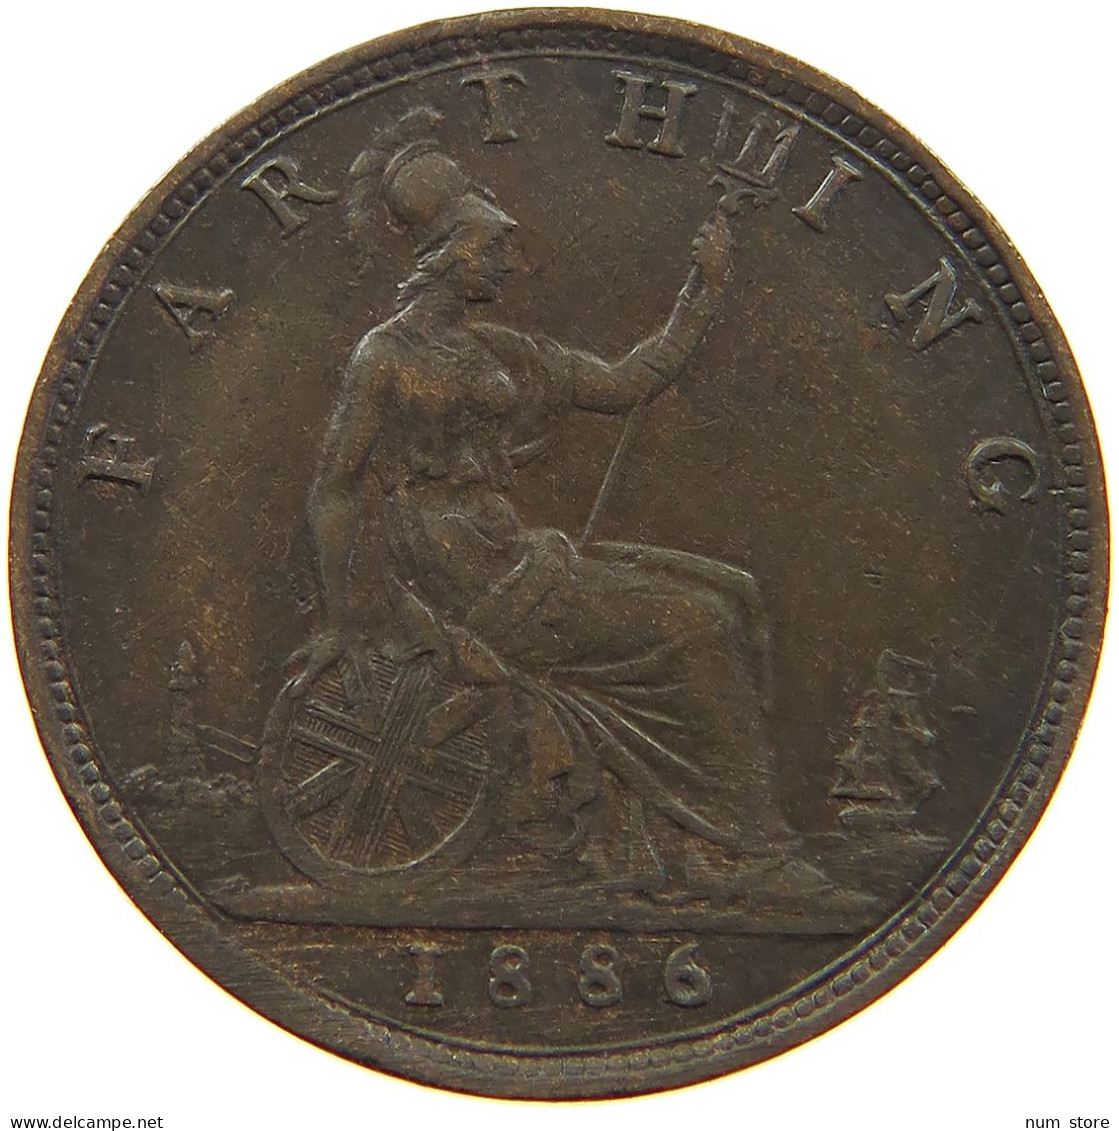 GREAT BRITAIN FARTHING 1886 Victoria 1837-1901 #a011 0773 - B. 1 Farthing